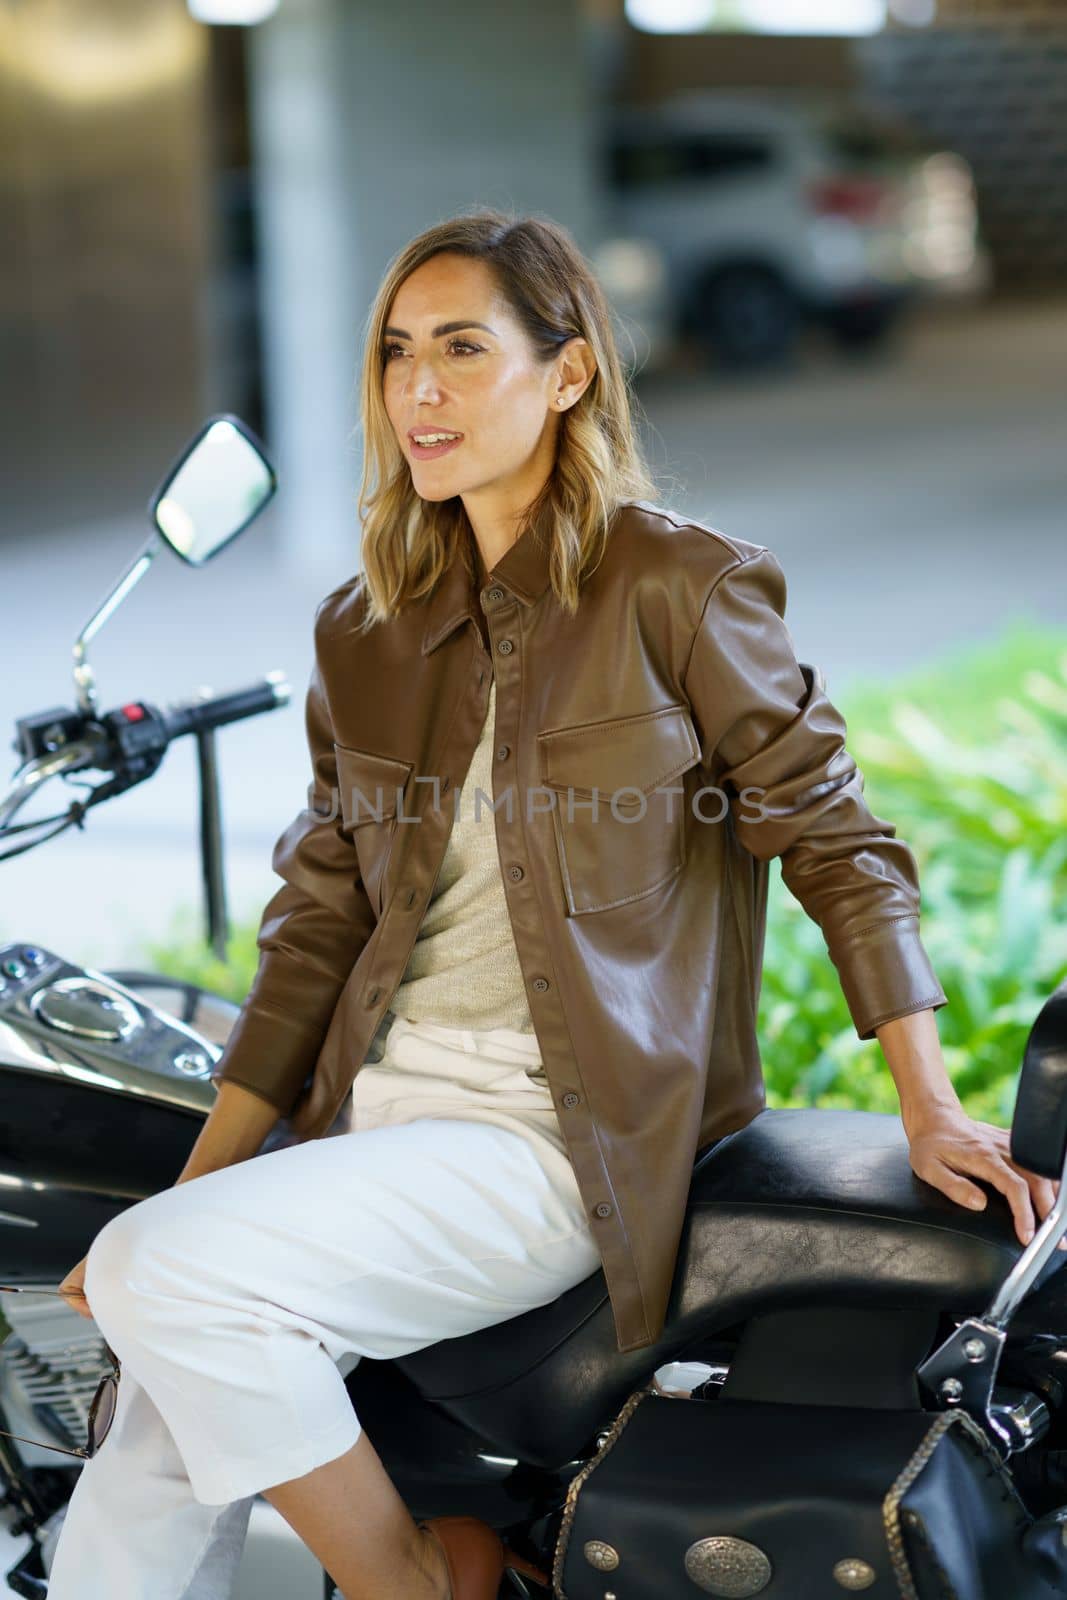 Adult female biker in stylish clothes looking away while sitting on motorcycle on blurred background of street